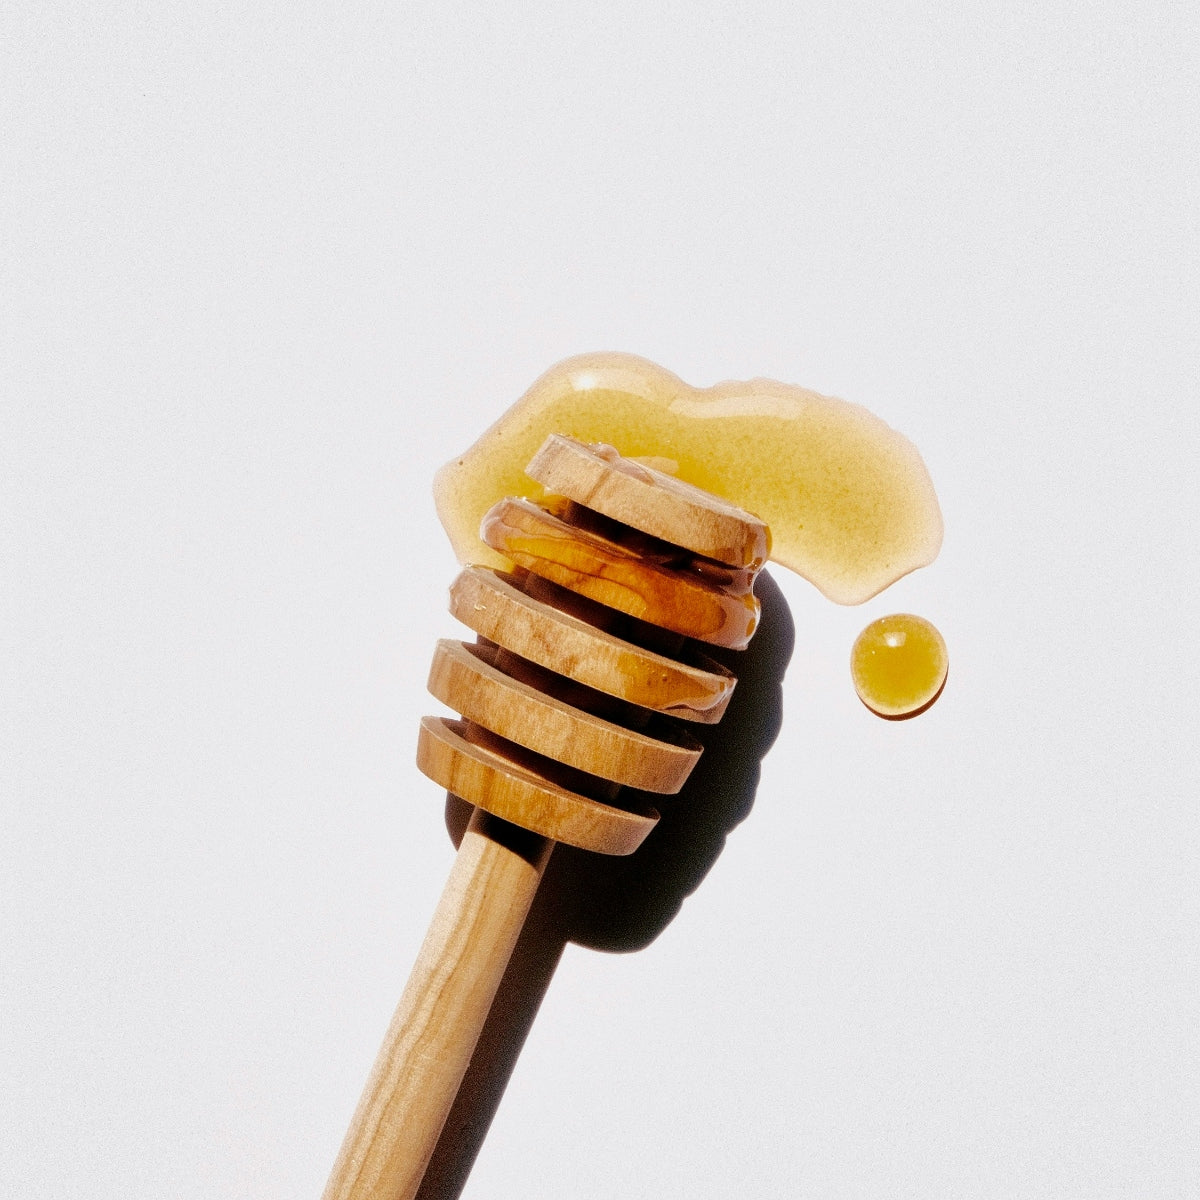 A honey stick with some honey on a white background.